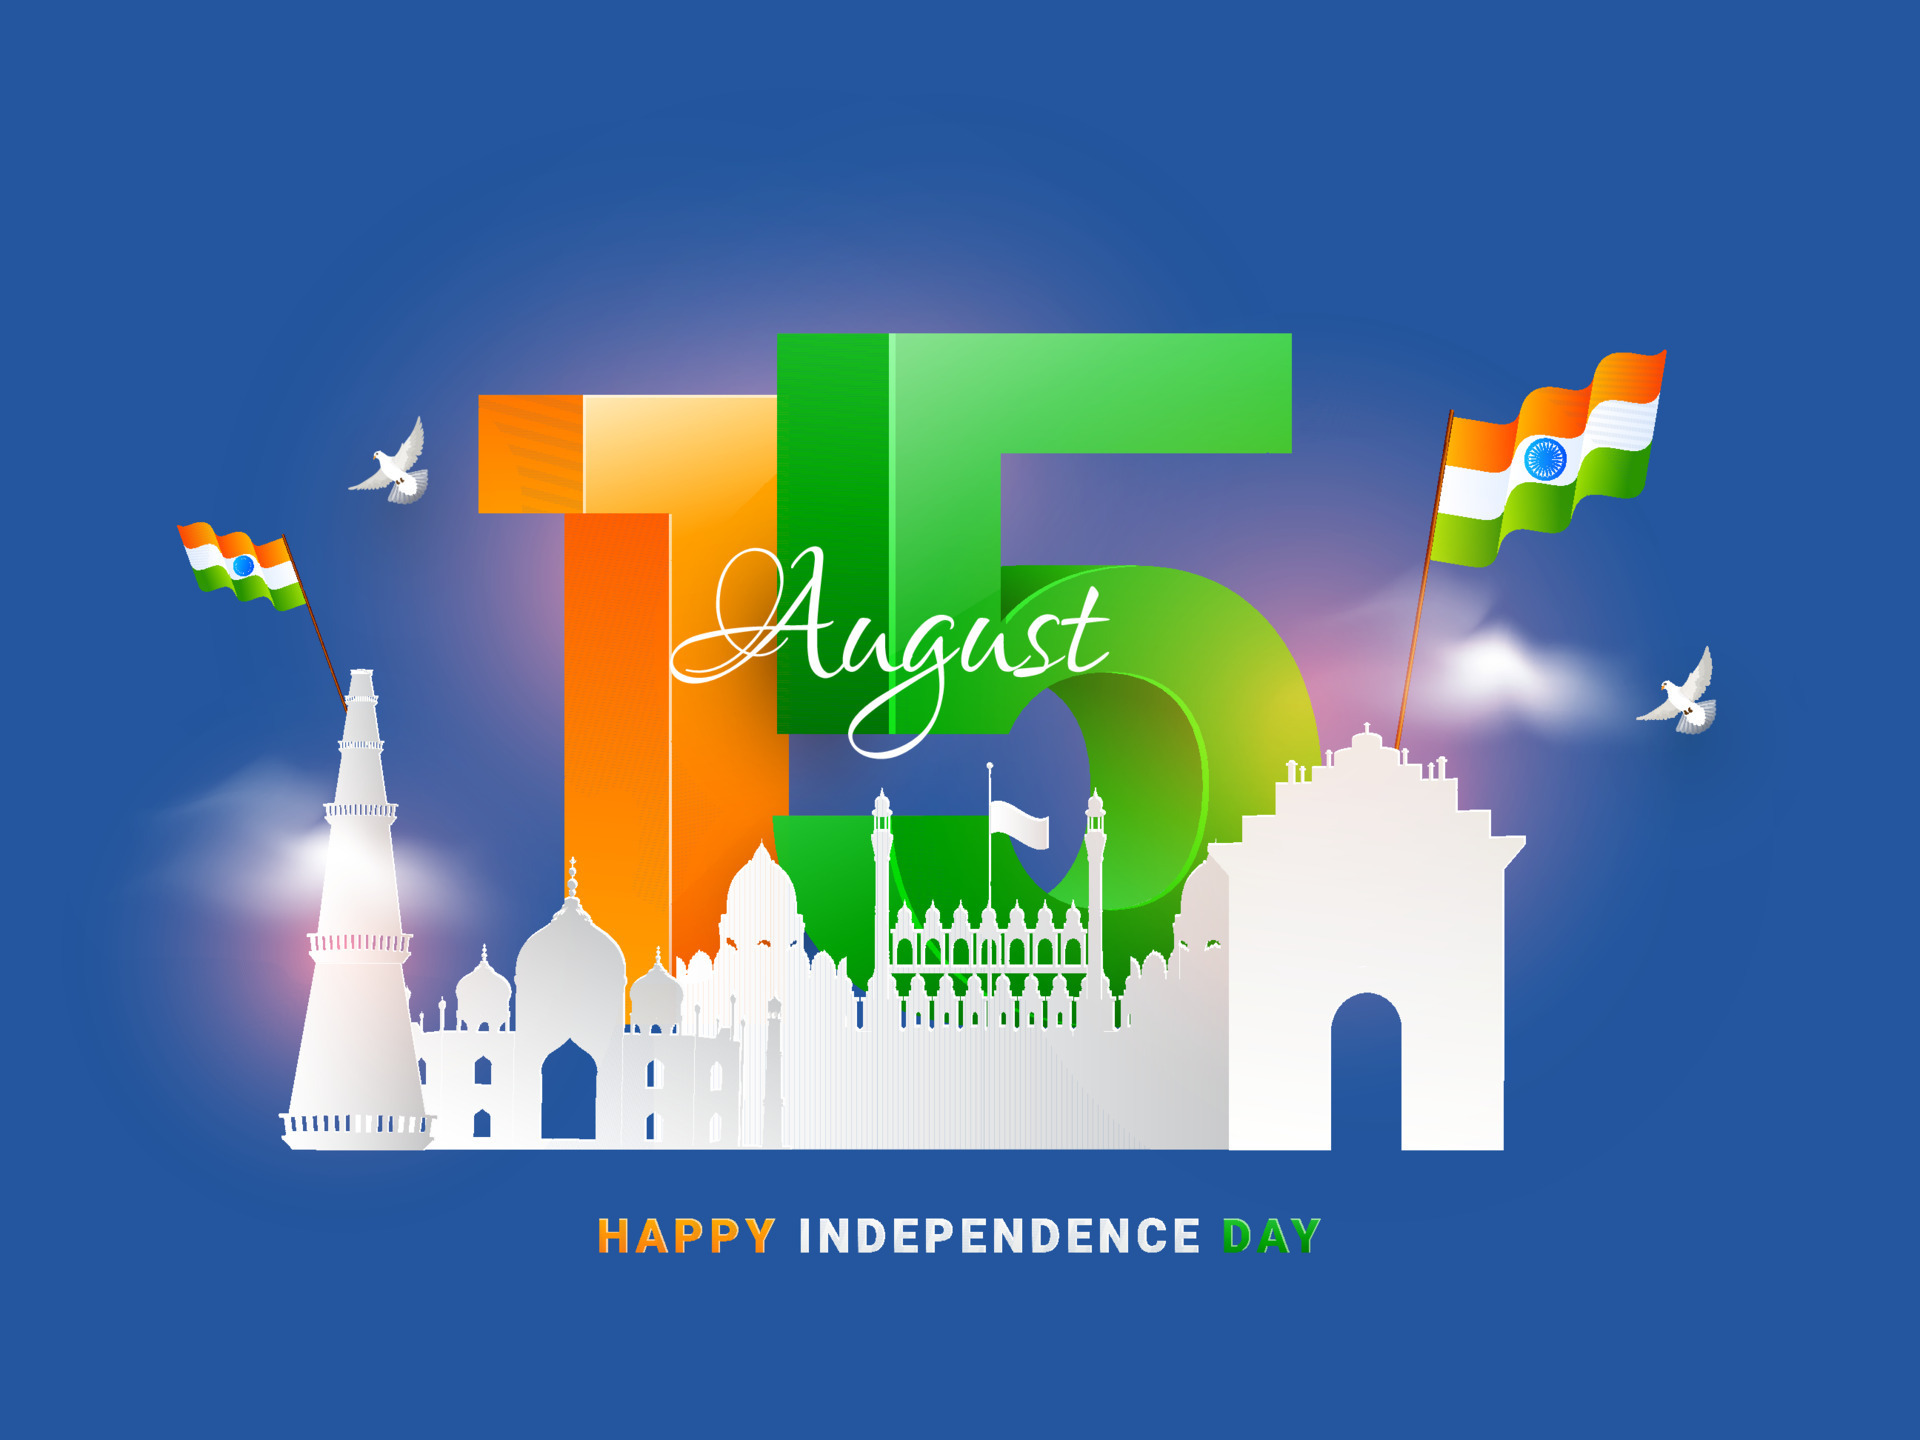 HD wallpaper: 15 august, Independence, india | Wallpaper Flare